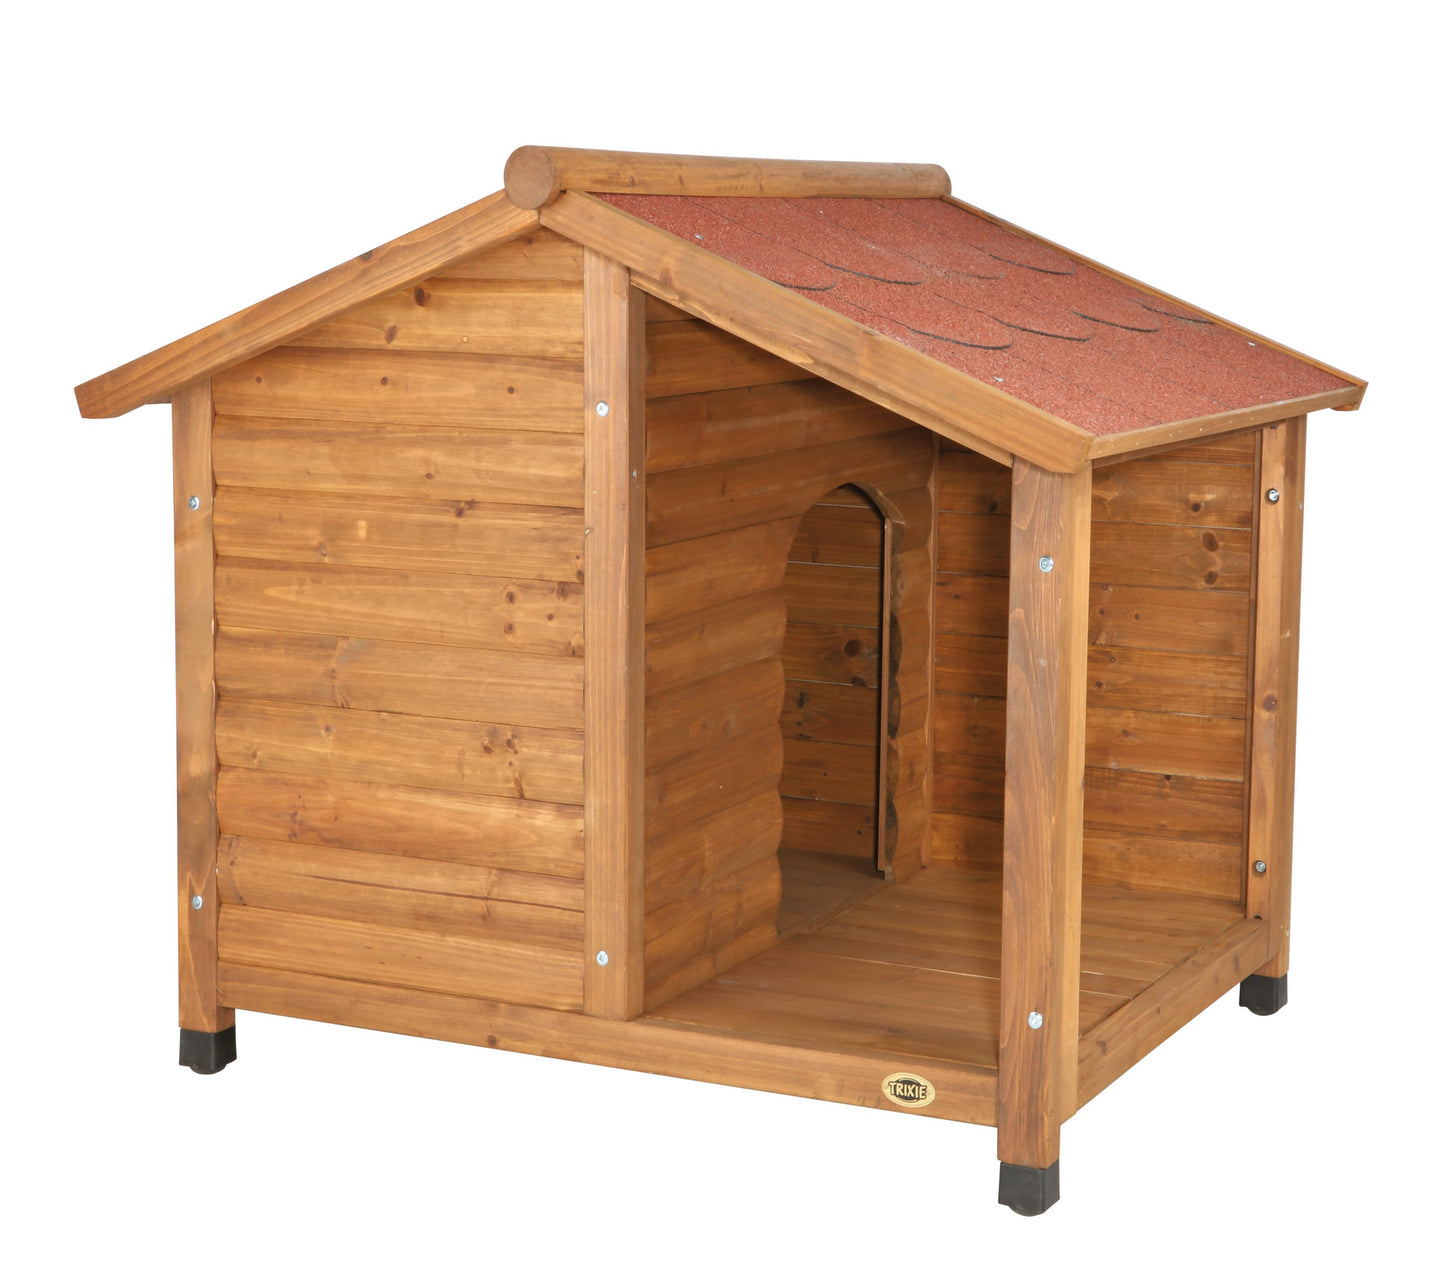 TRIXIE Natura Lodge Dog House, Covered Porch, Hinged Roof, Adjustable Legs, Brown, Small Animals & Pet Supplies > Pet Supplies > Dog Supplies > Dog Houses TRIXIE Medium - (39.25L x 35.25W x 32.25H ")  